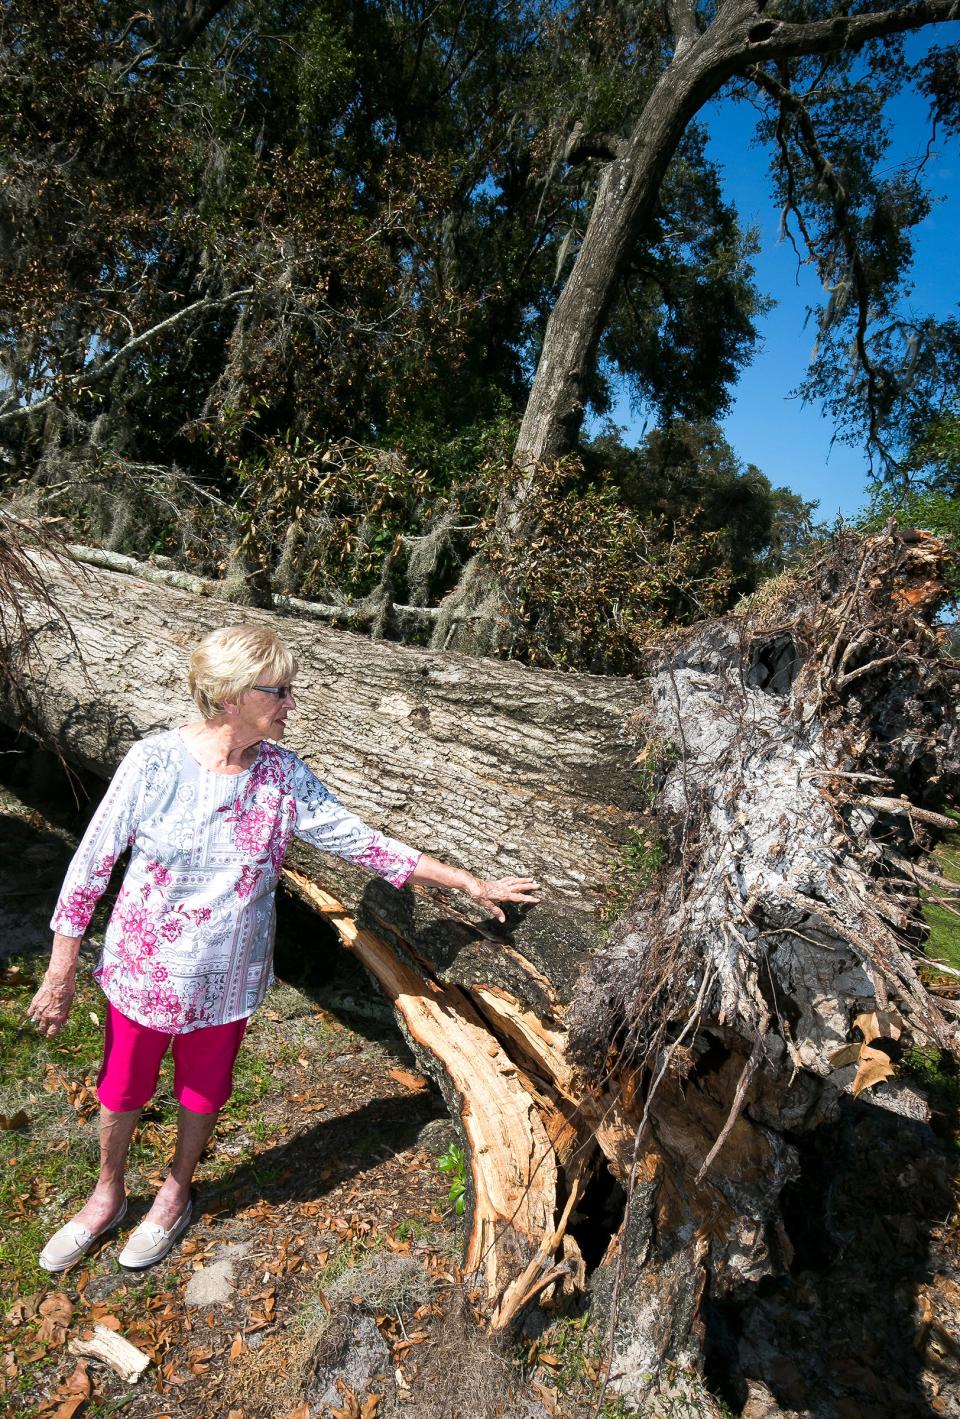 Helen Sanzeni talks about the five granny oaks that fell in her yard during Hurricane Irma in September 2017.